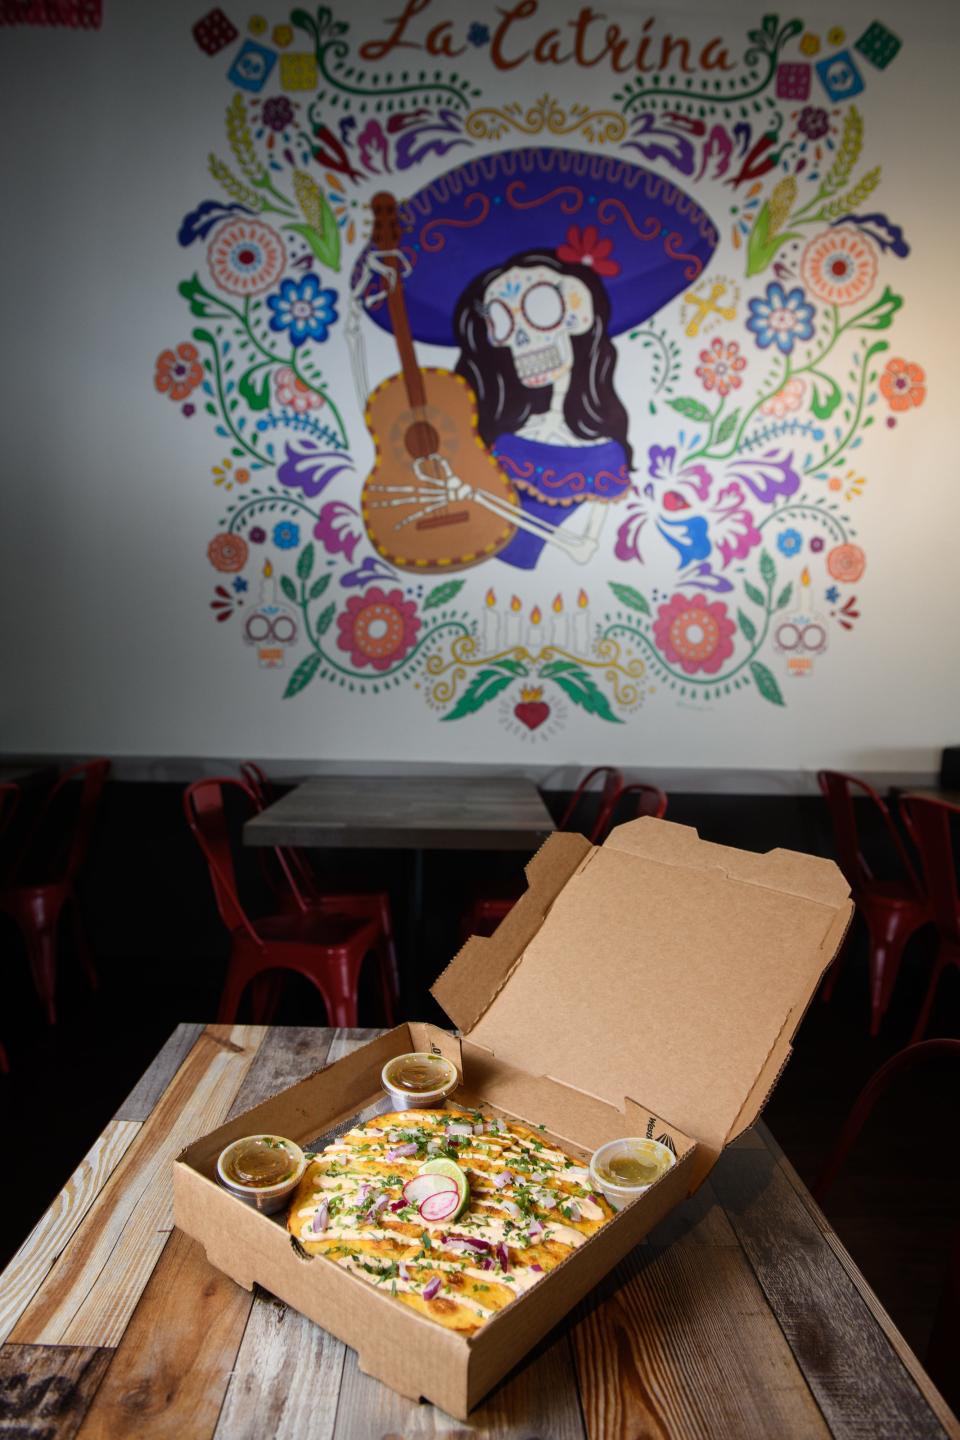 Mexican pizza from La Catrina at 1816 Owen Drive on Monday, July 25, 2022.